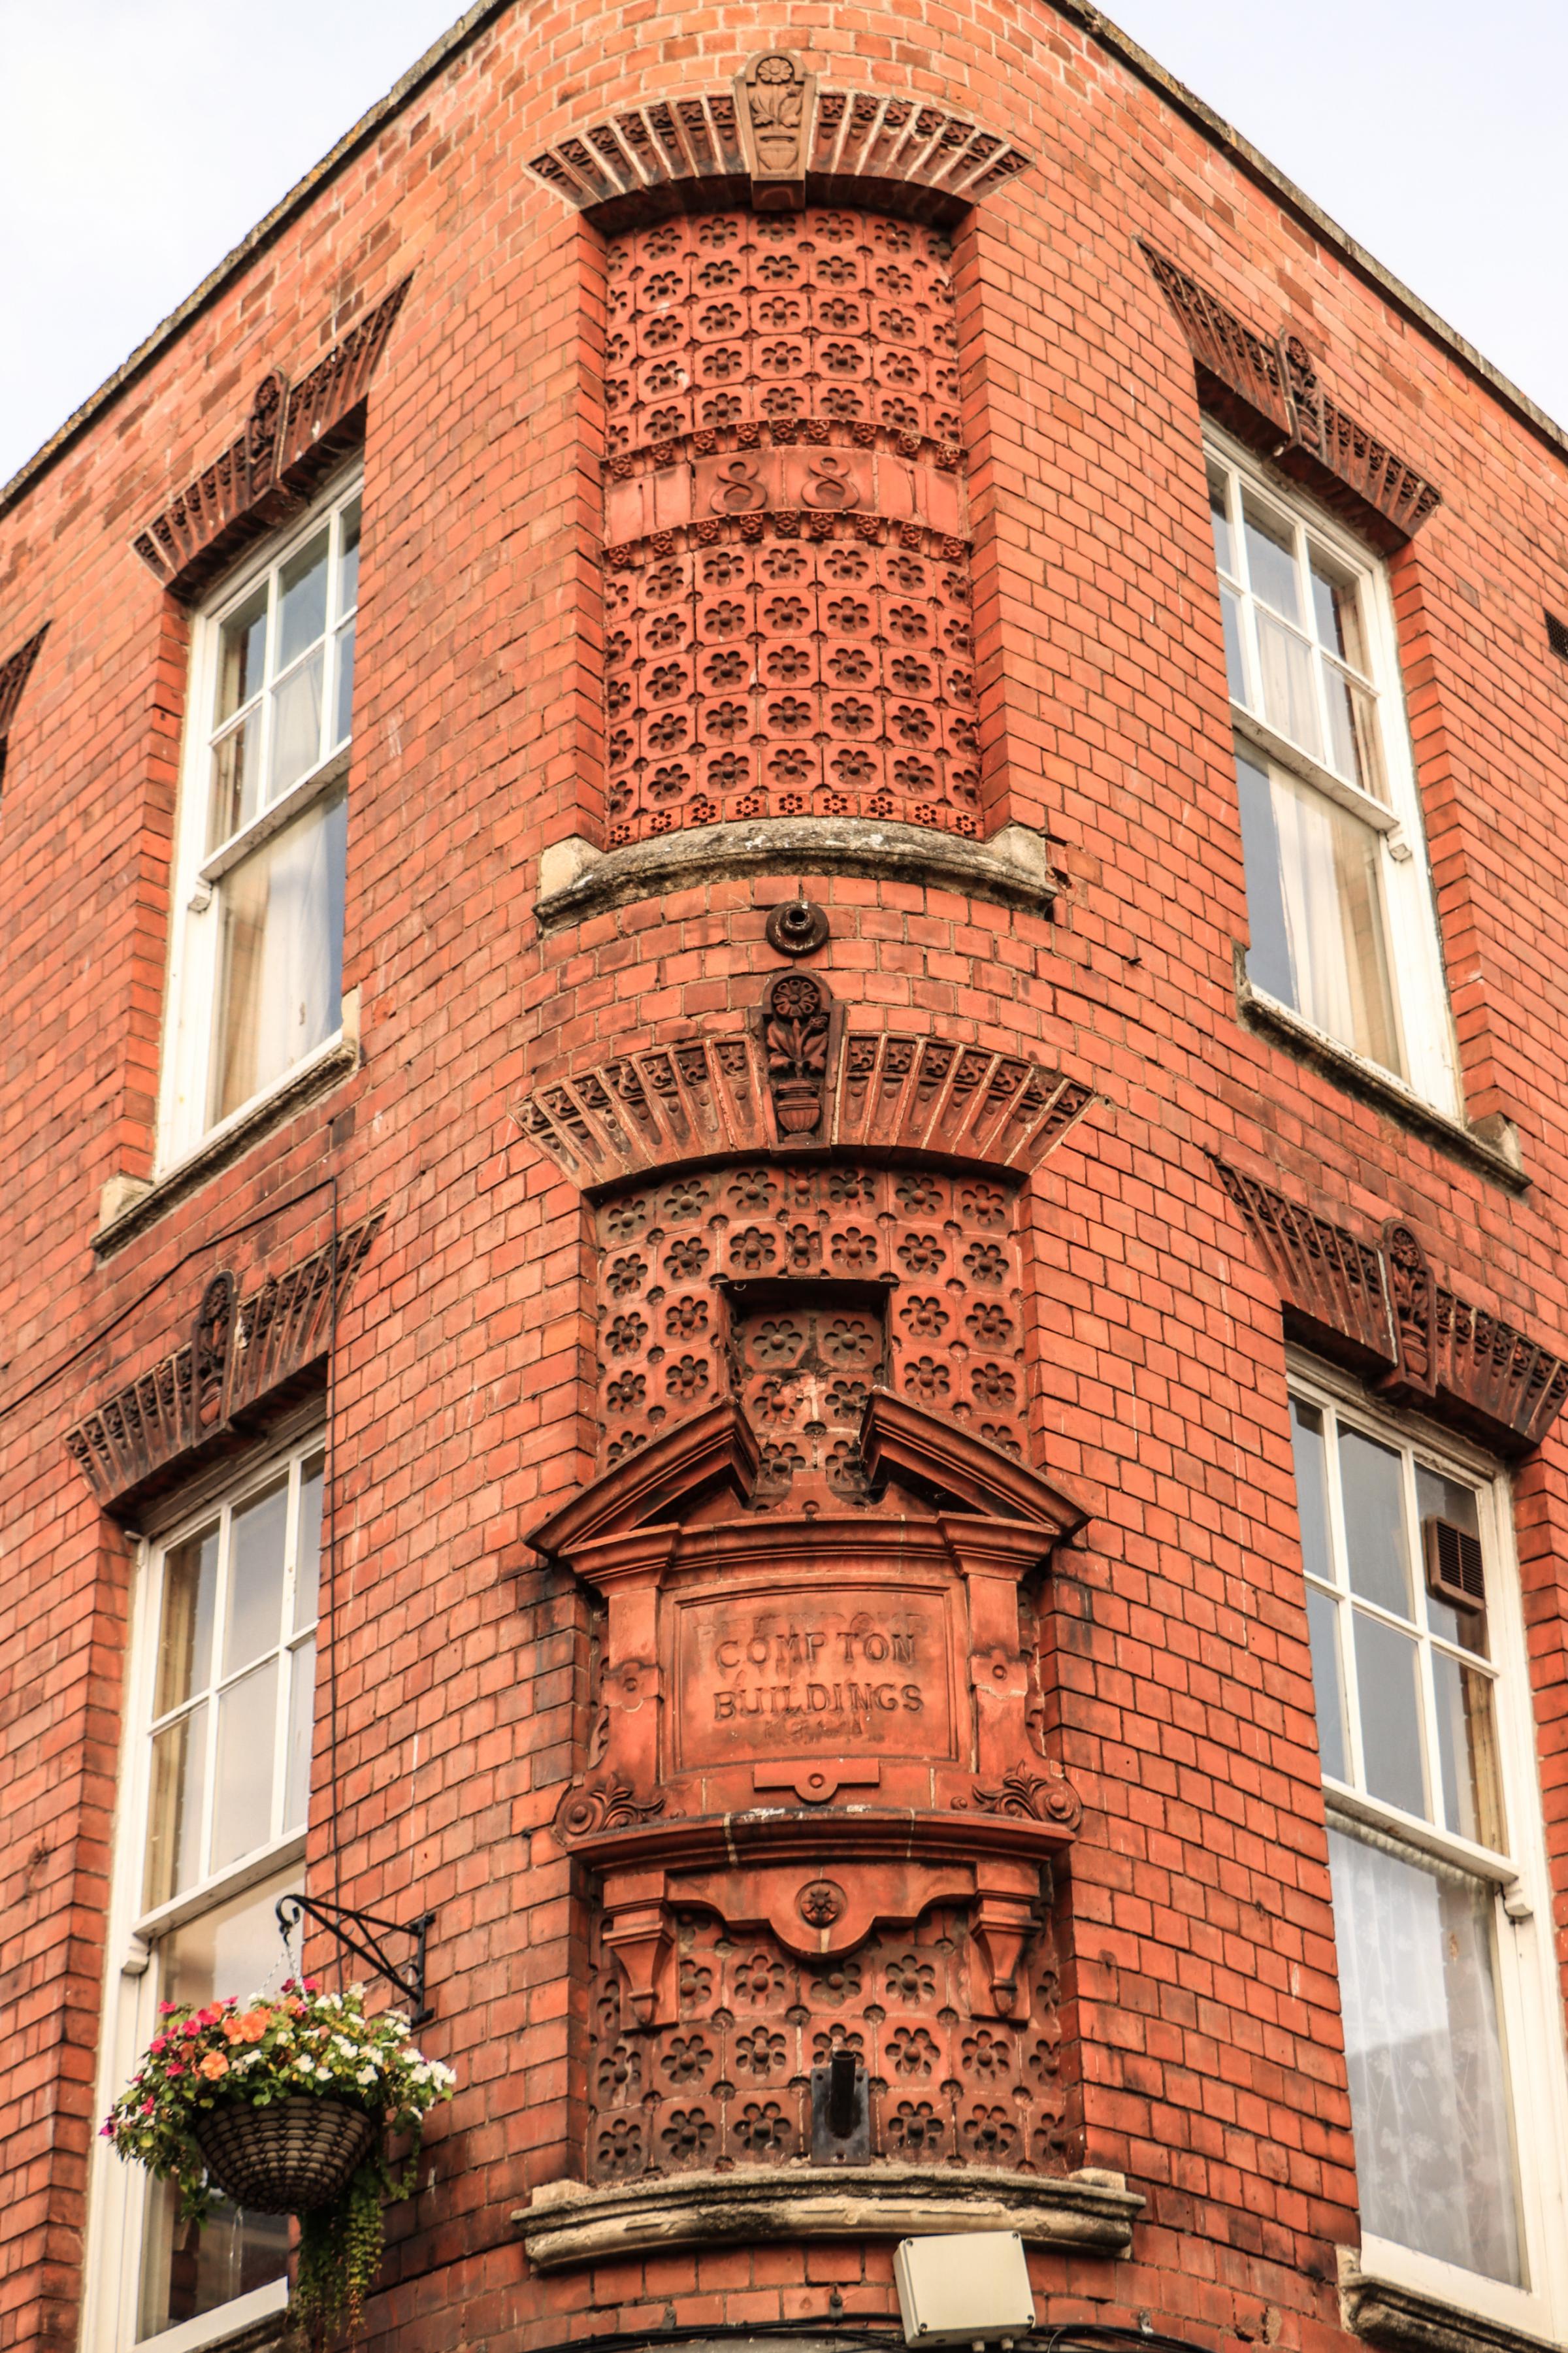 Is this brickwork a jewel in the crown of the city?